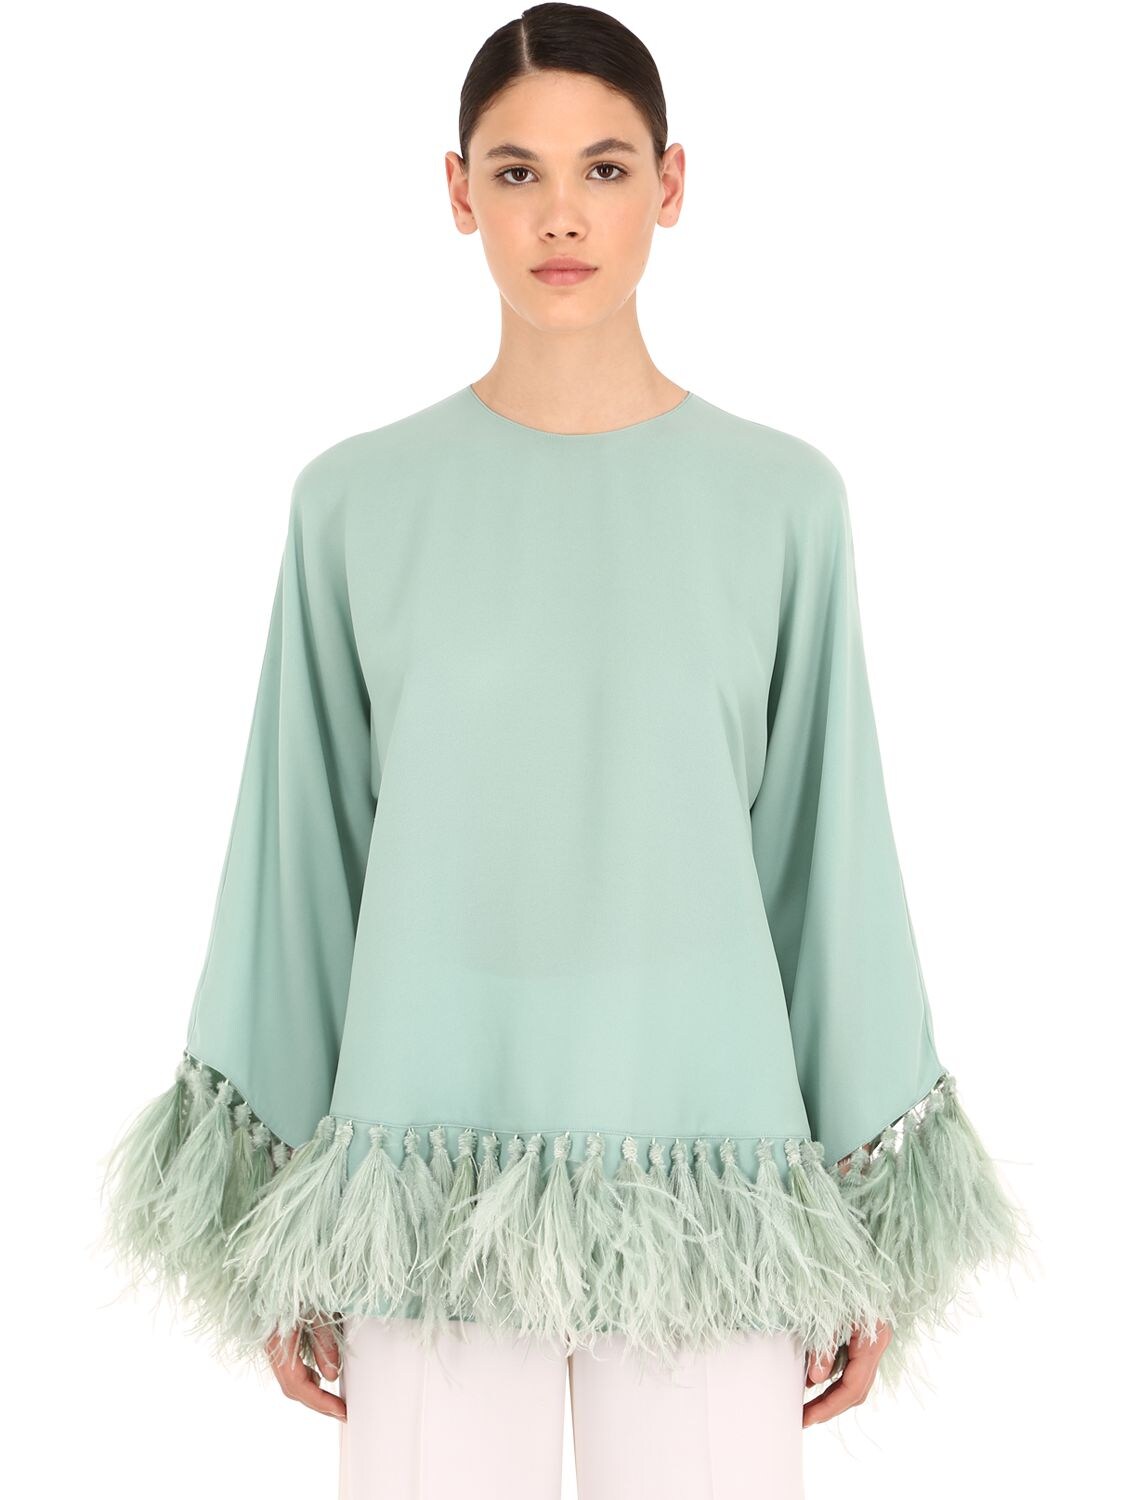 VALENTINO SILK GEORGETTE TOP W/ FEATHERS,69IAE6027-NVCW0